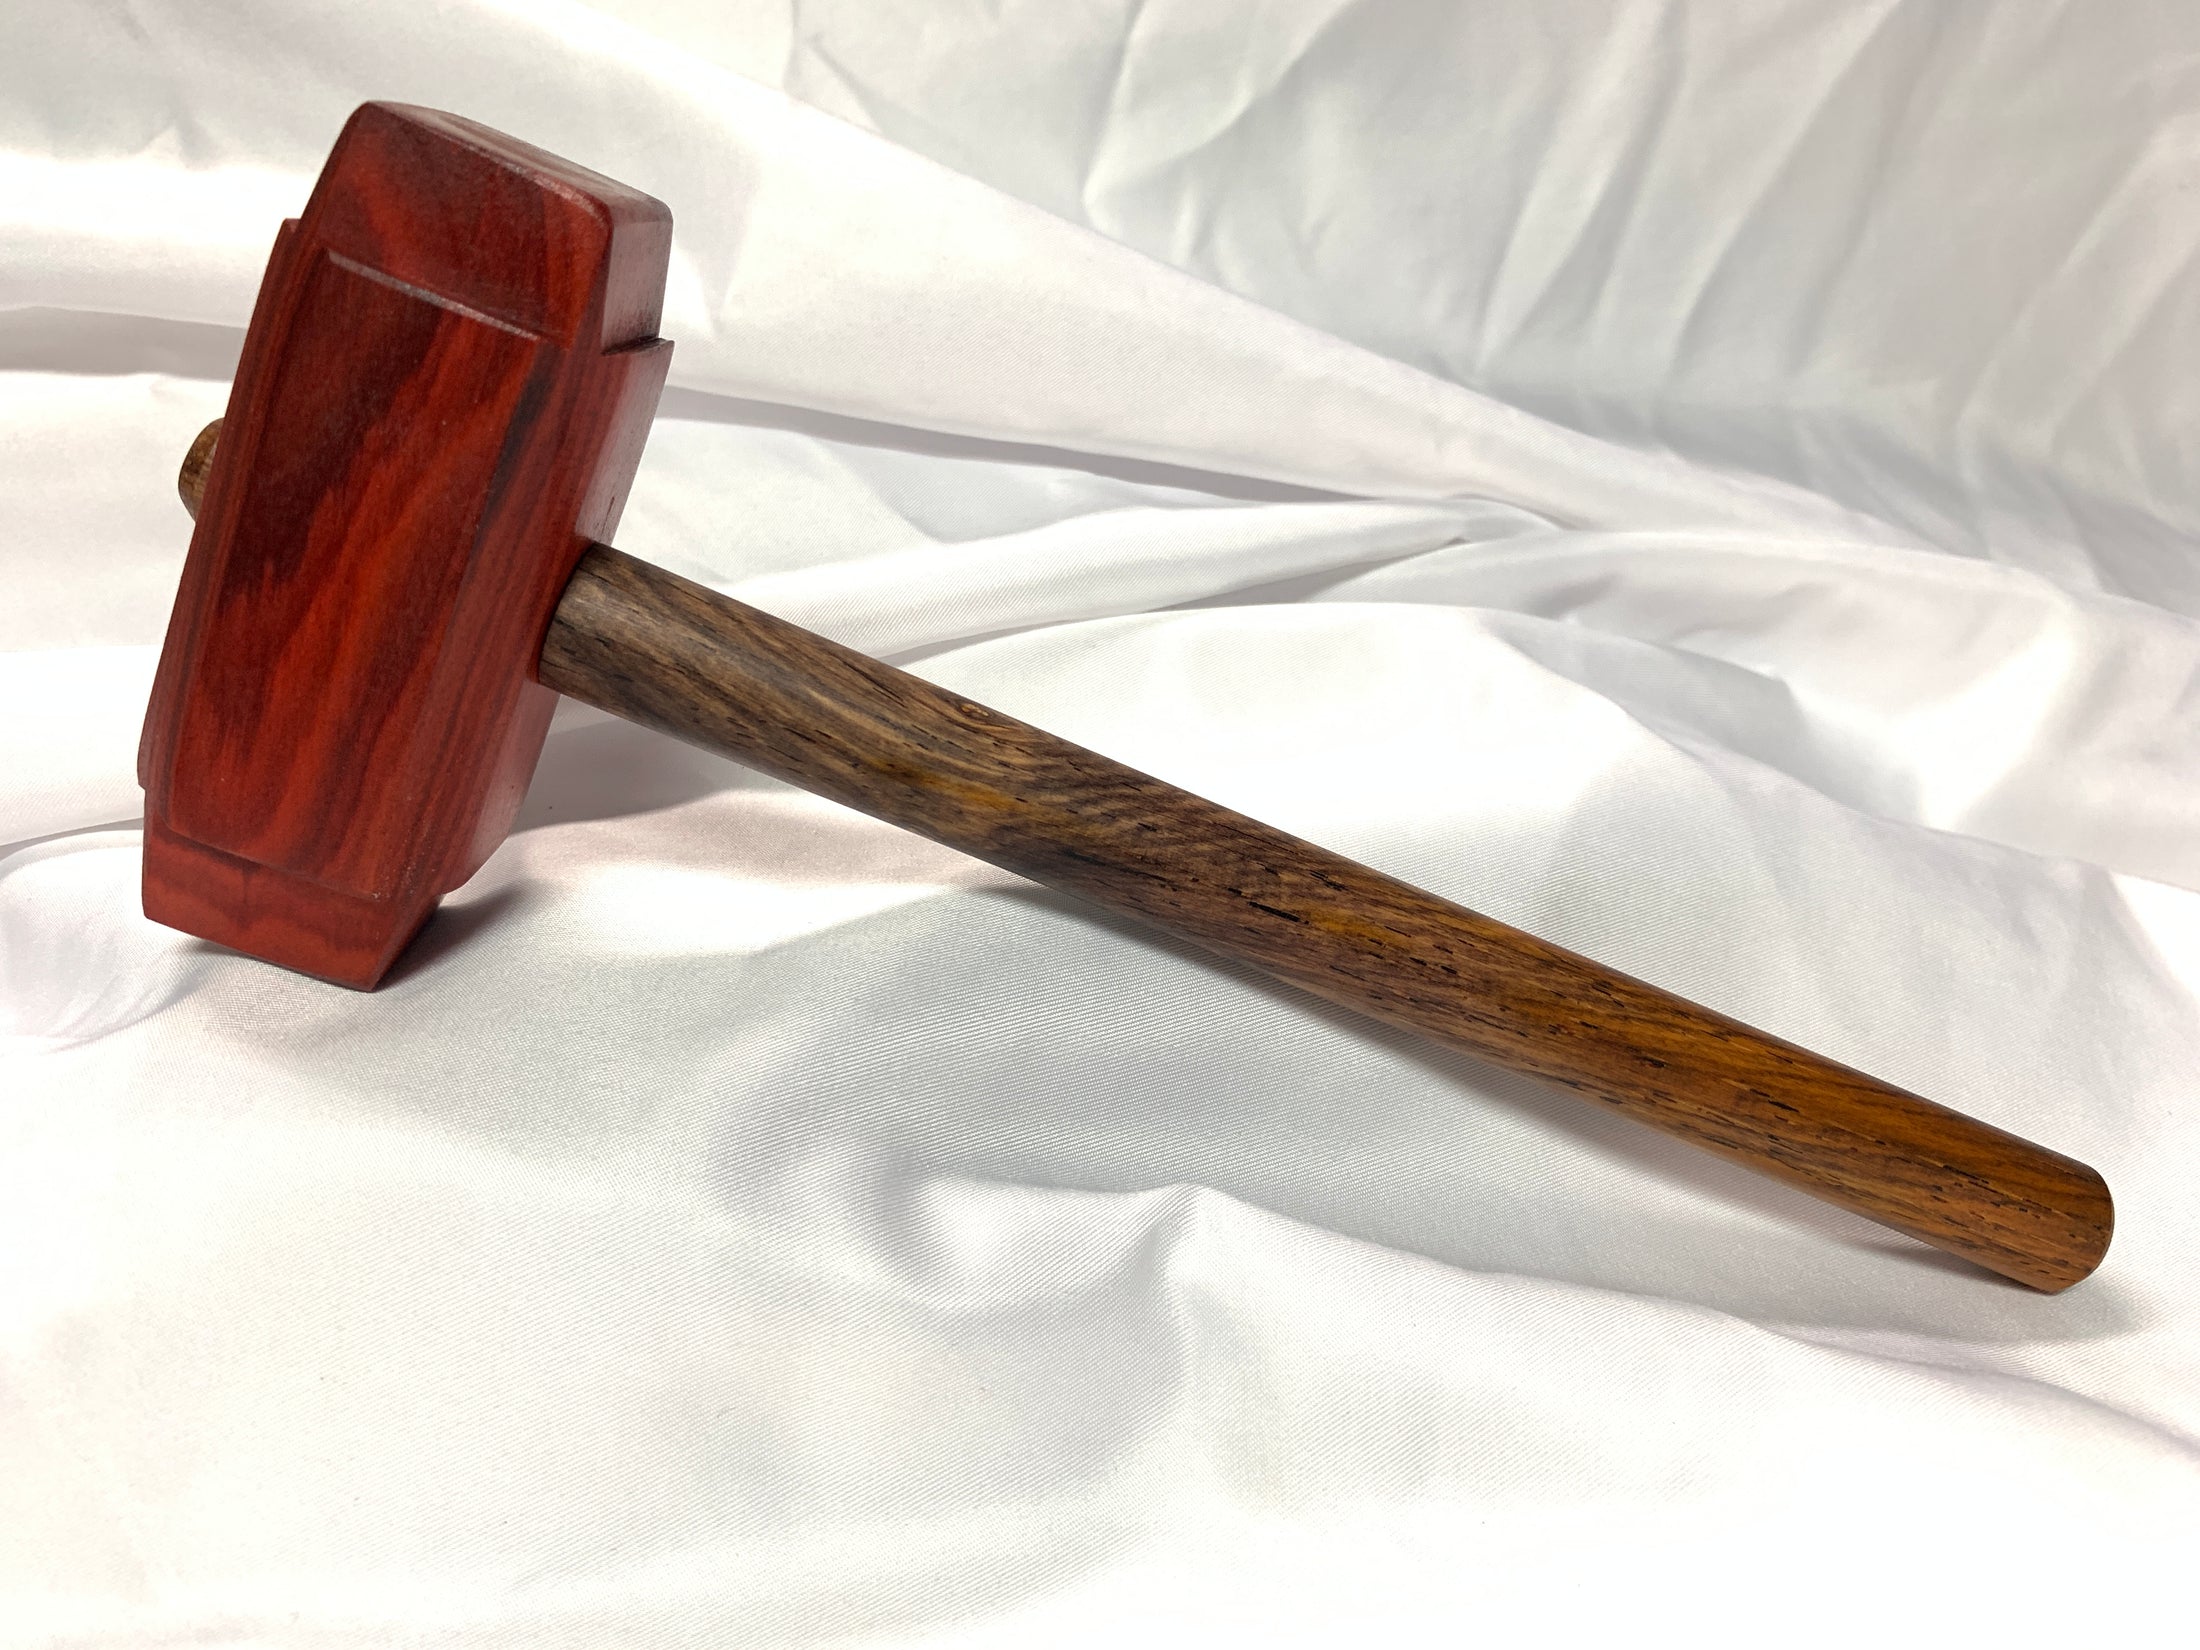 Thors Hammer Woodworking Mallet Redheart Head with Cocobolo Handle Kings Fine Woodworking